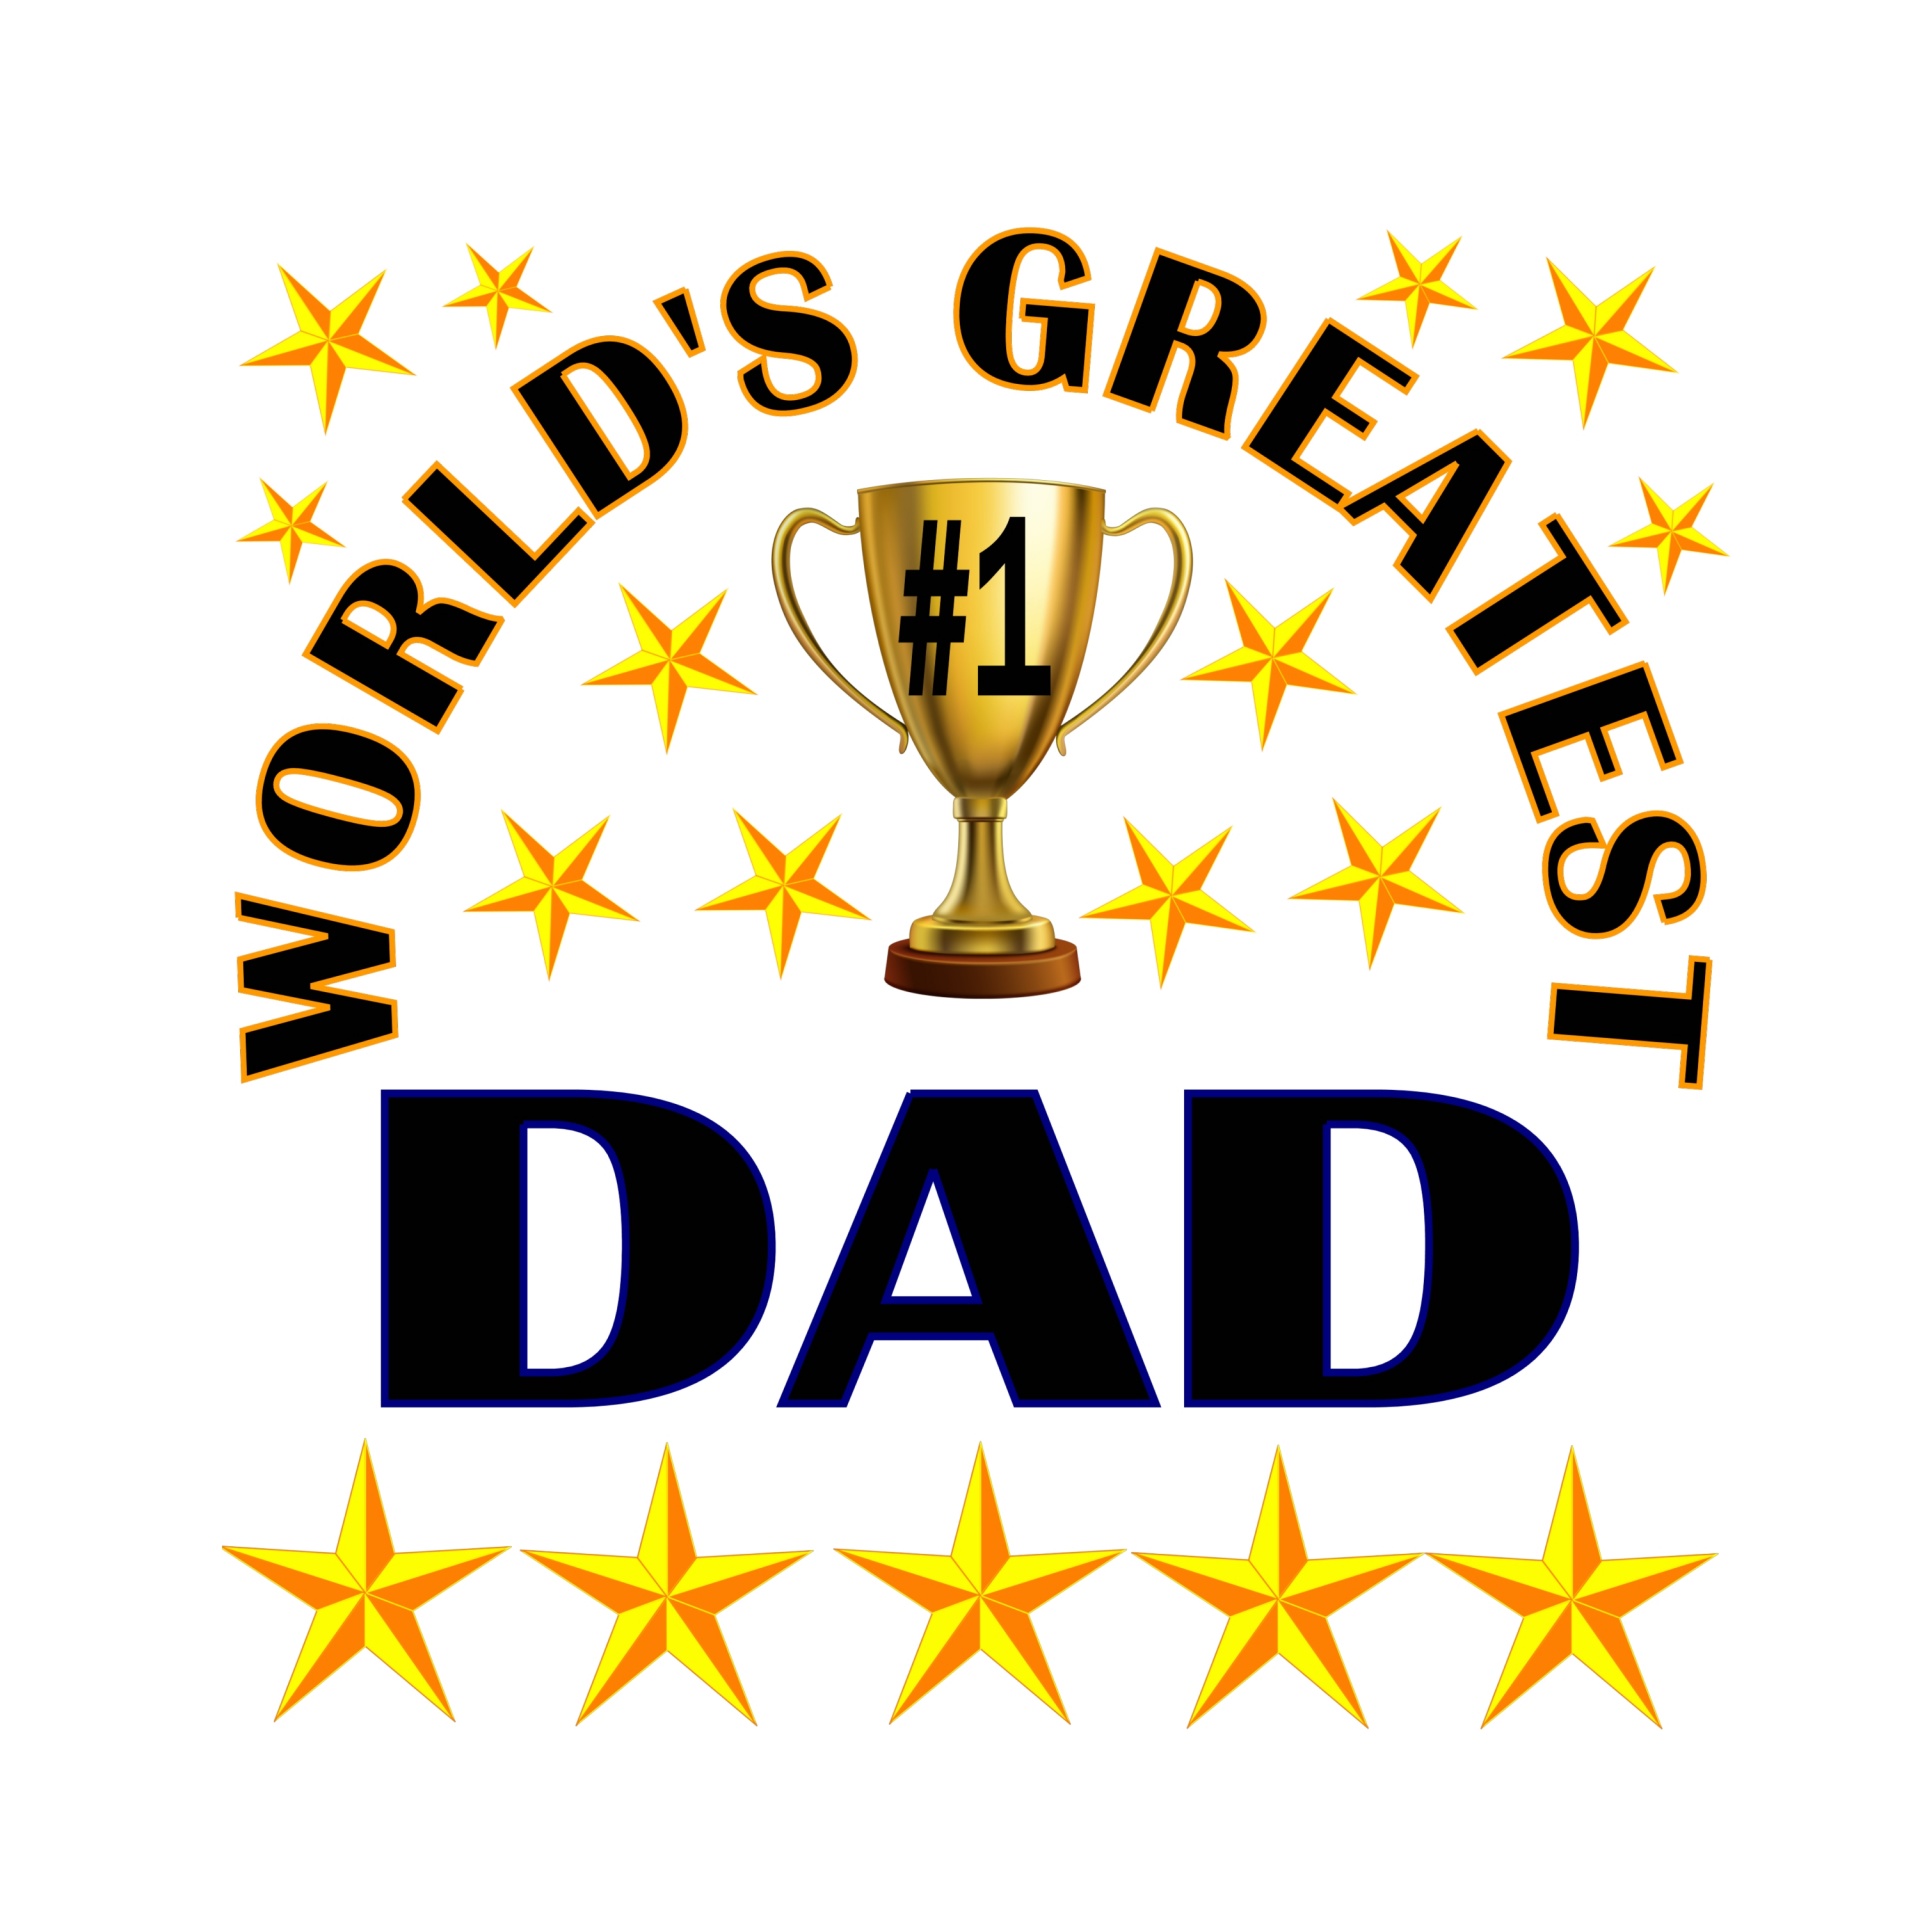 Hell s greatest dad кимико гленн. Hels Greatest dad. Hell's Greatest dad обложка. Star for the fathers Day. Hells great dad текст.